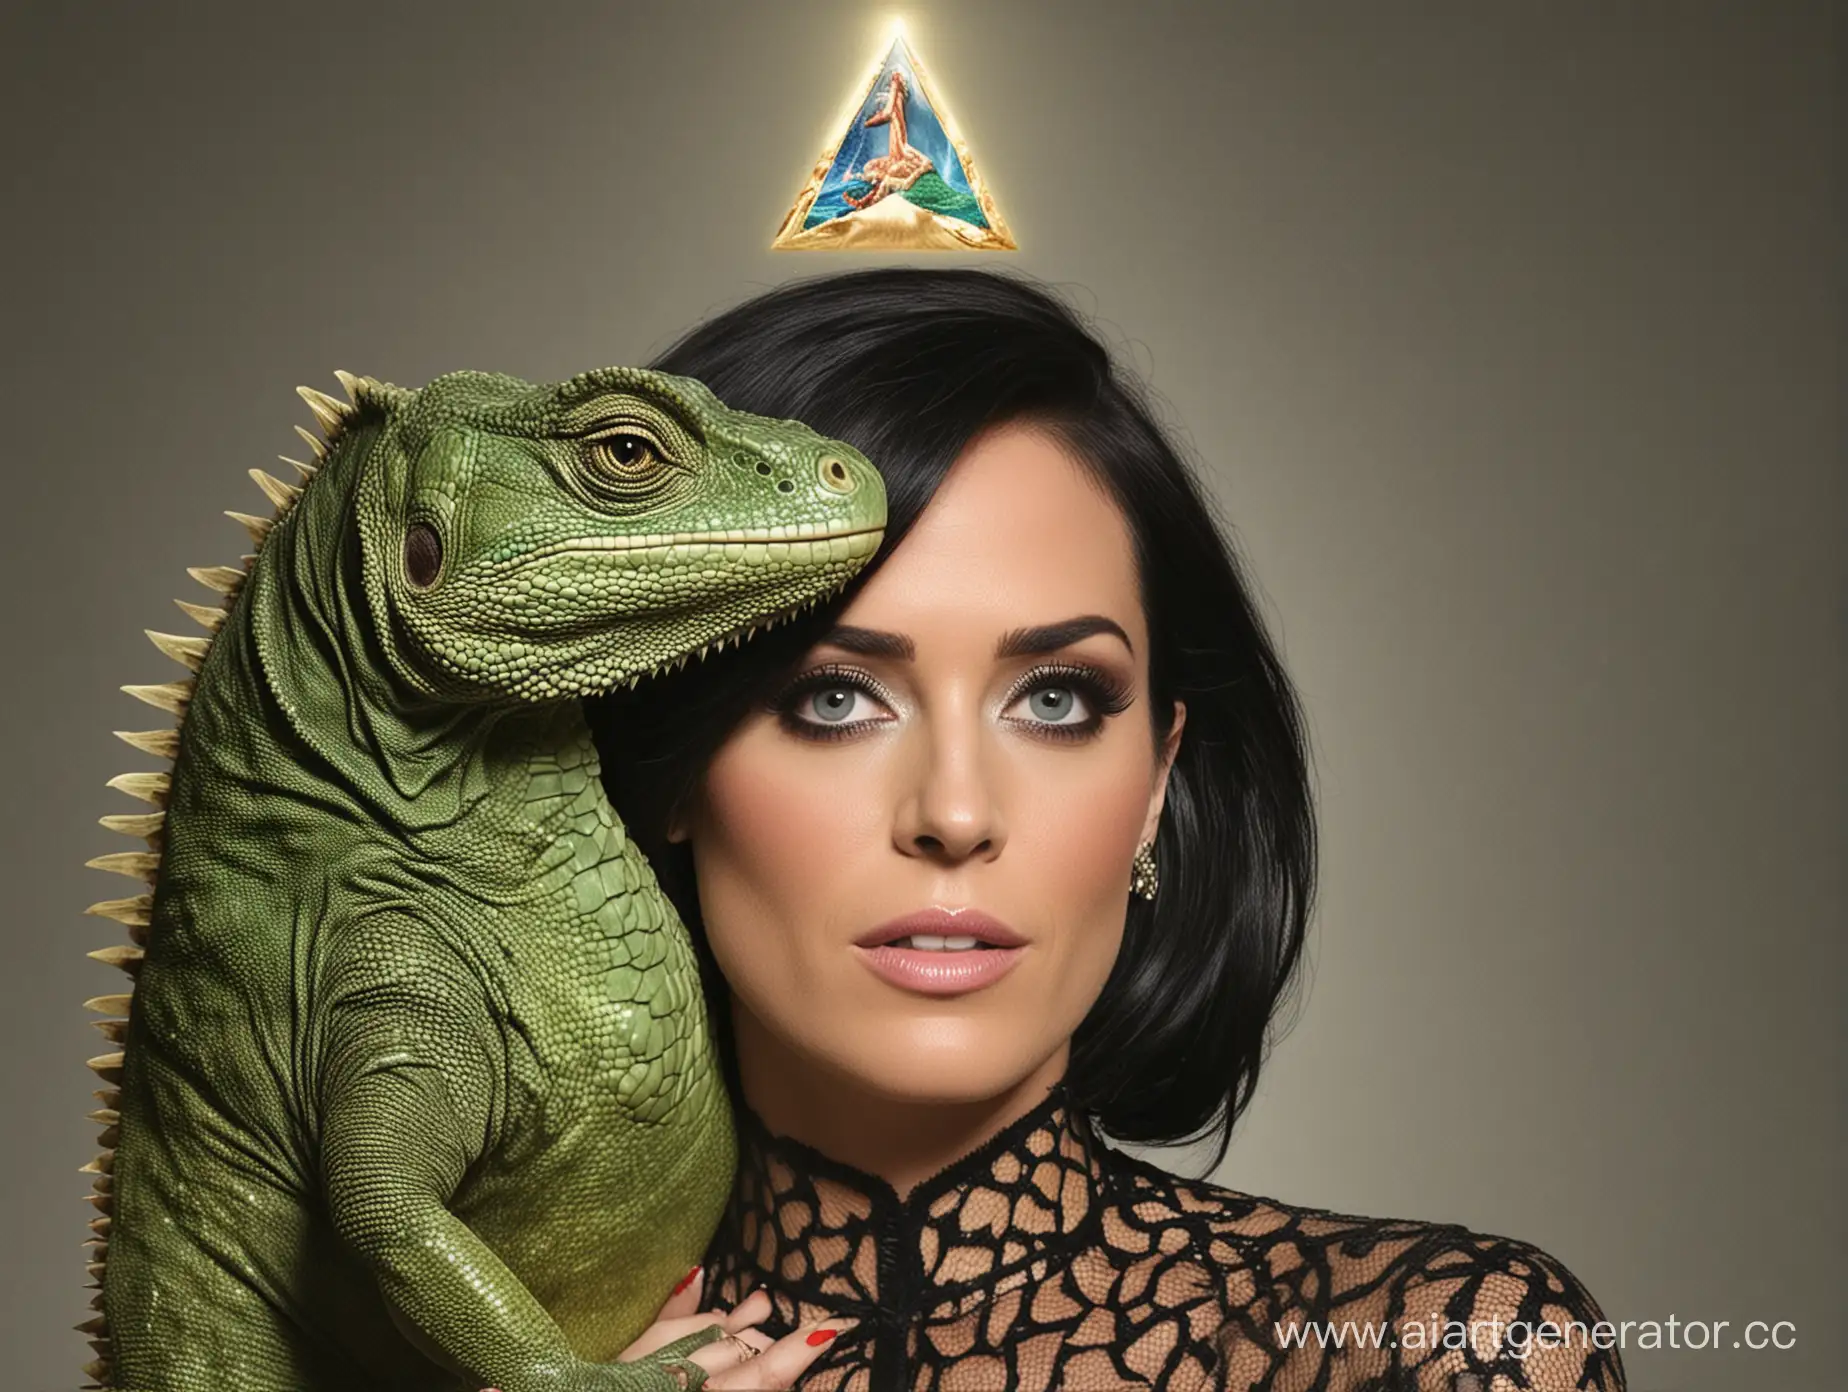 Katie-Perry-with-Lizard-Illuminati-Pop-Icon-with-Mysterious-Reptilian-Allegory